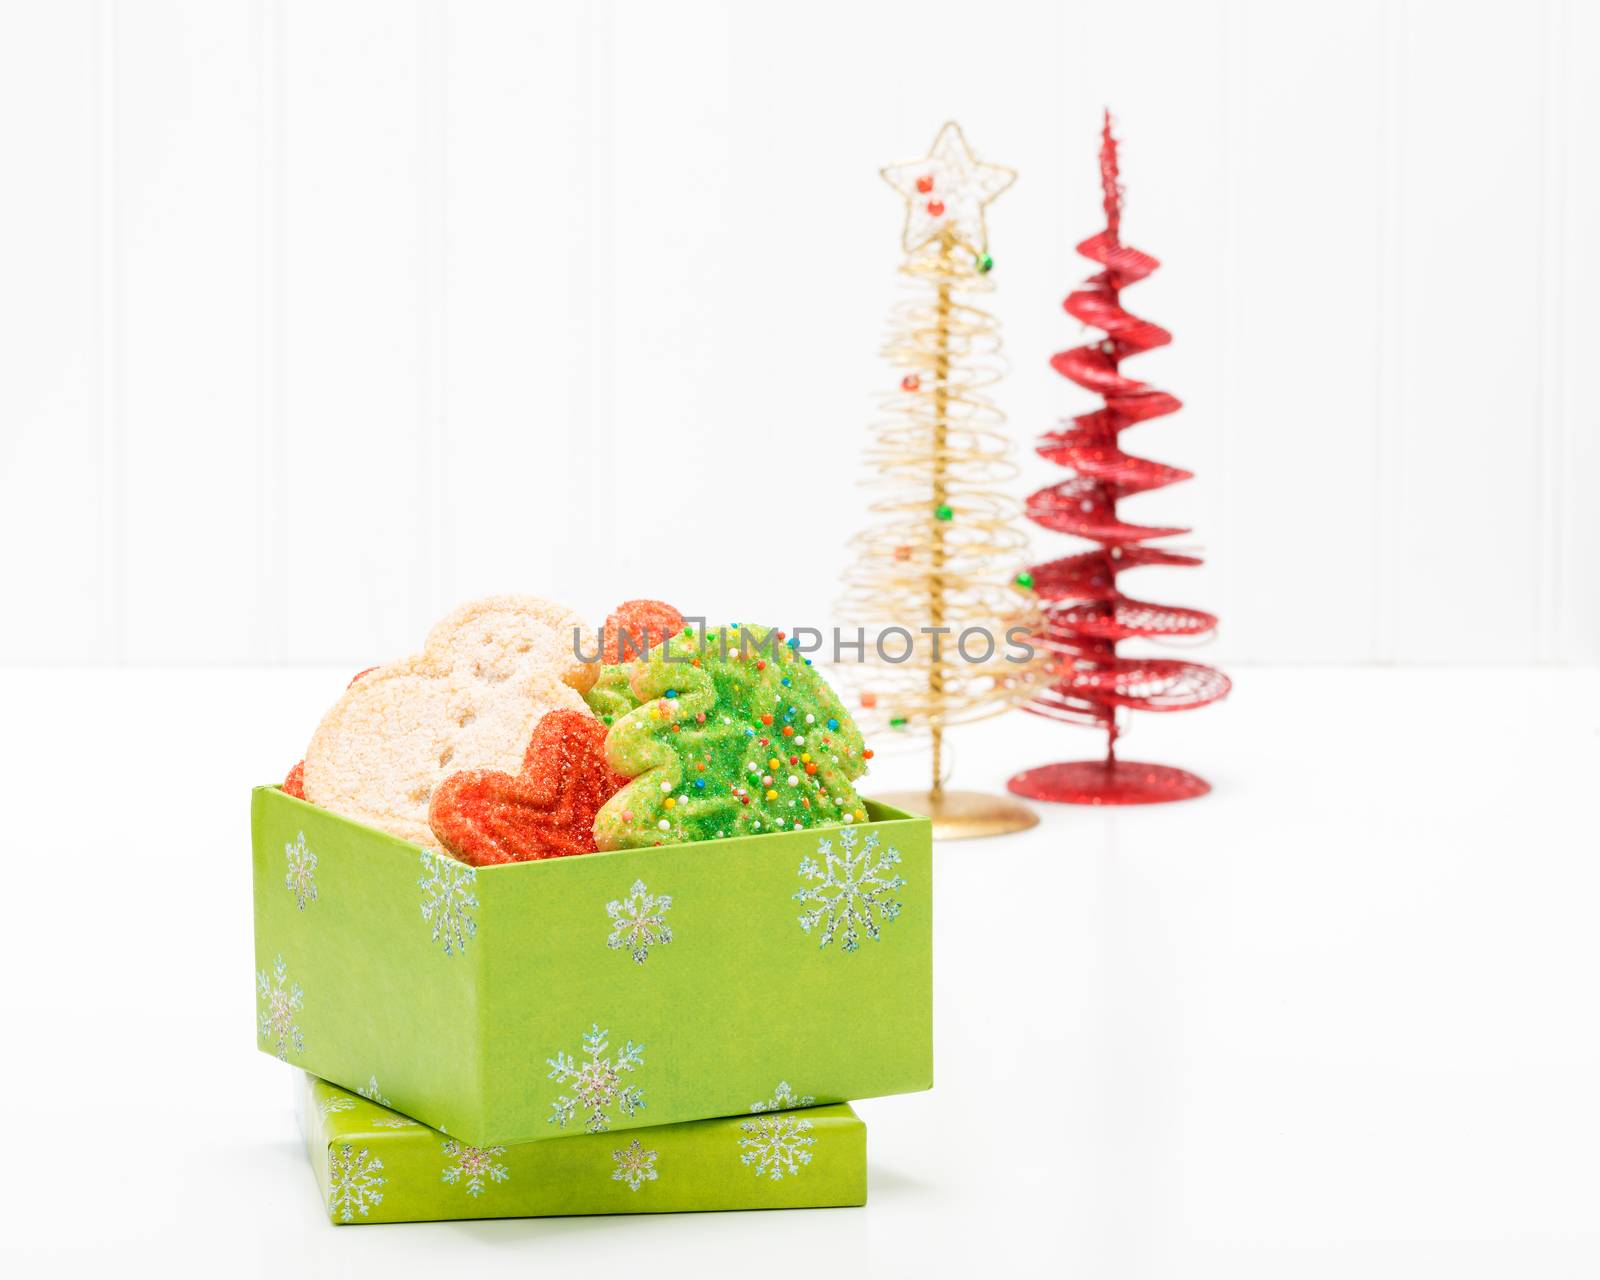 Variety of festive christmas sugar cookies in a gift box.